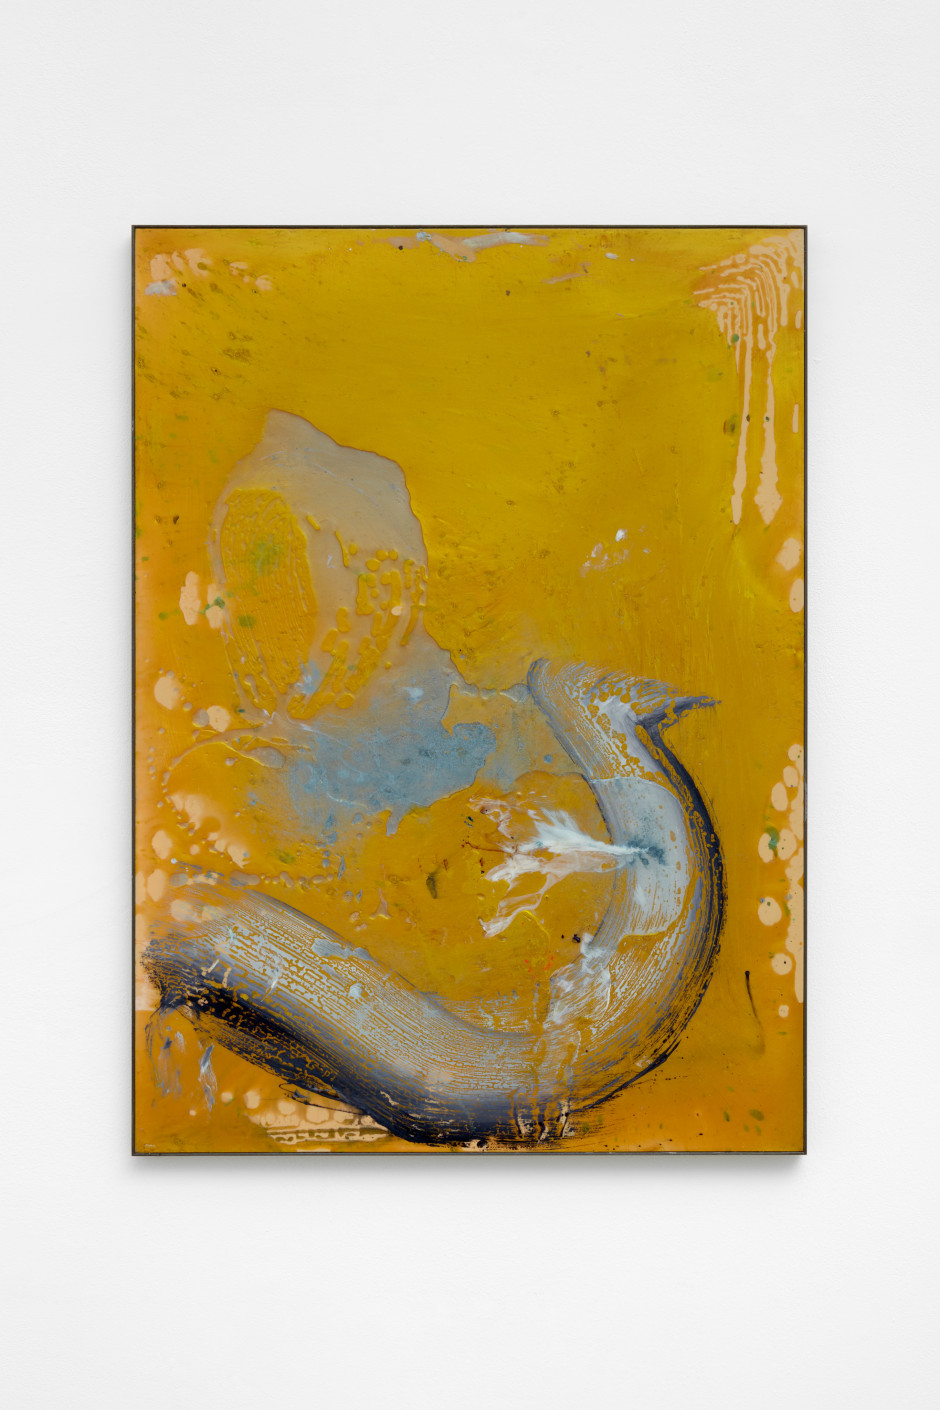 Untitled, 2021  signed, numbered and dated on verso  cast urethane resin, fiberglass, epoxy  74.8 x 54.3 x 2 cm / 29 ½ x 21 ⅜ x ¾ in